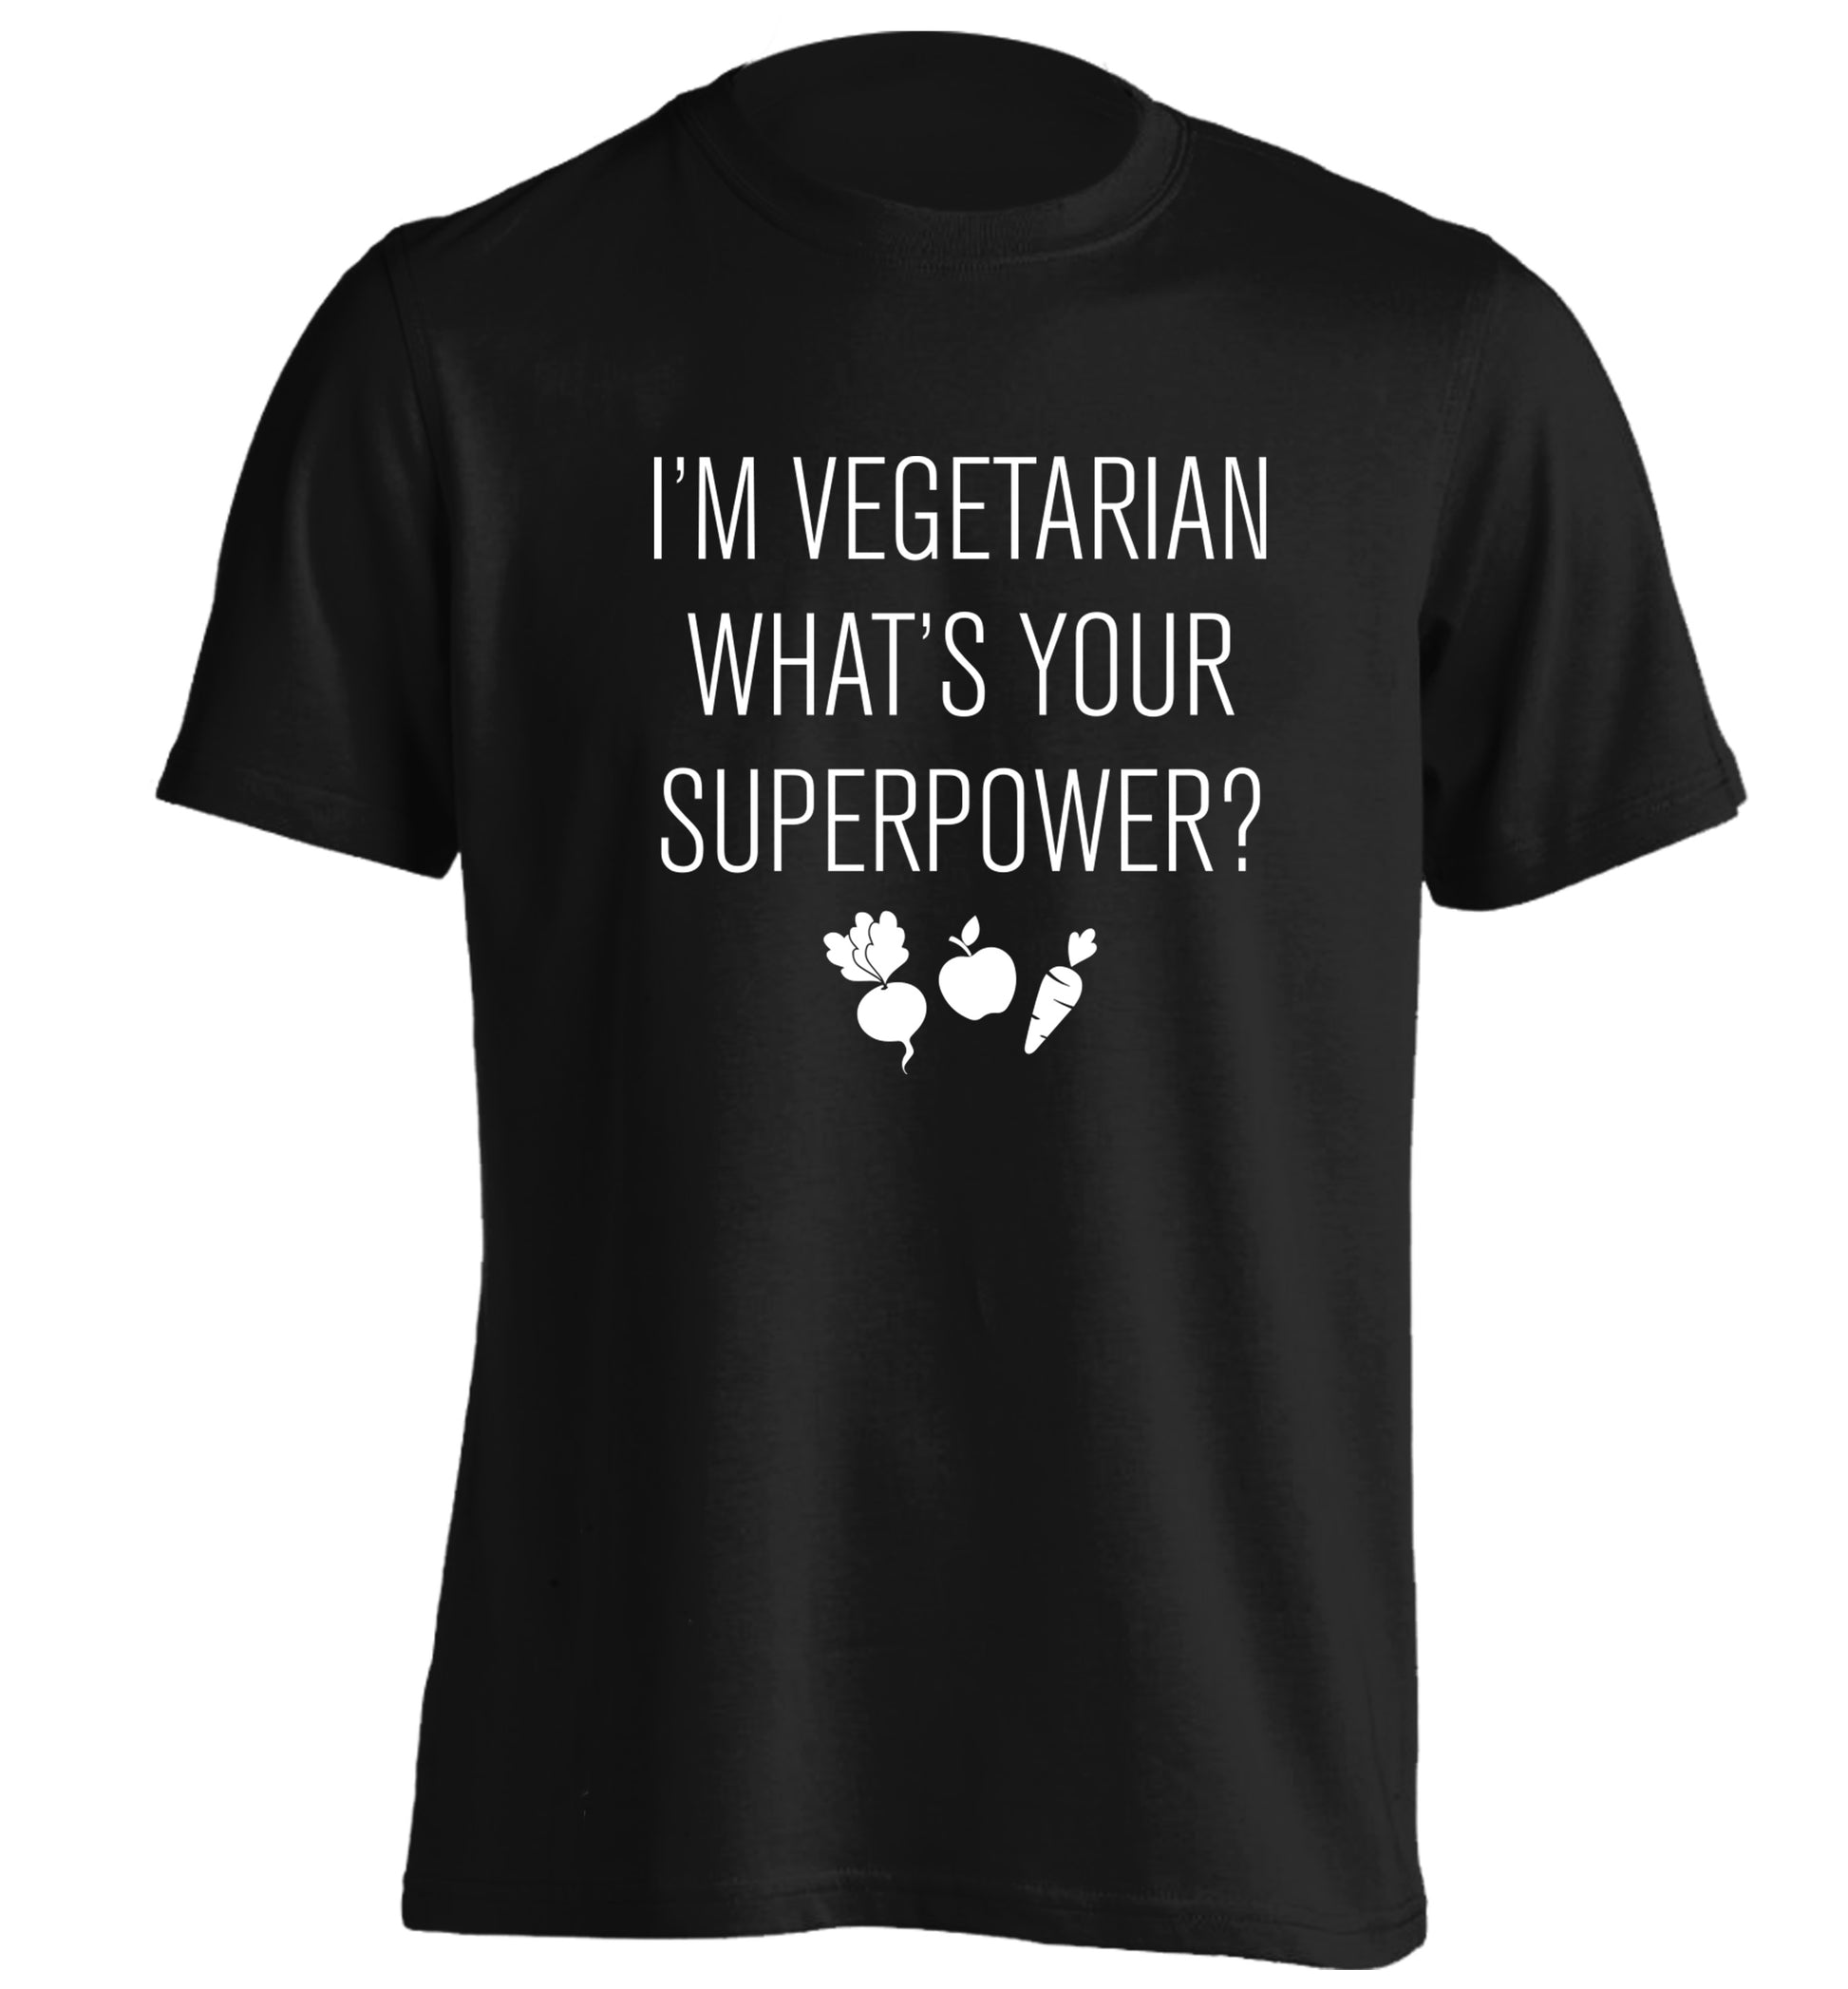 I'm vegetarian what's your superpower? adults unisex black Tshirt 2XL